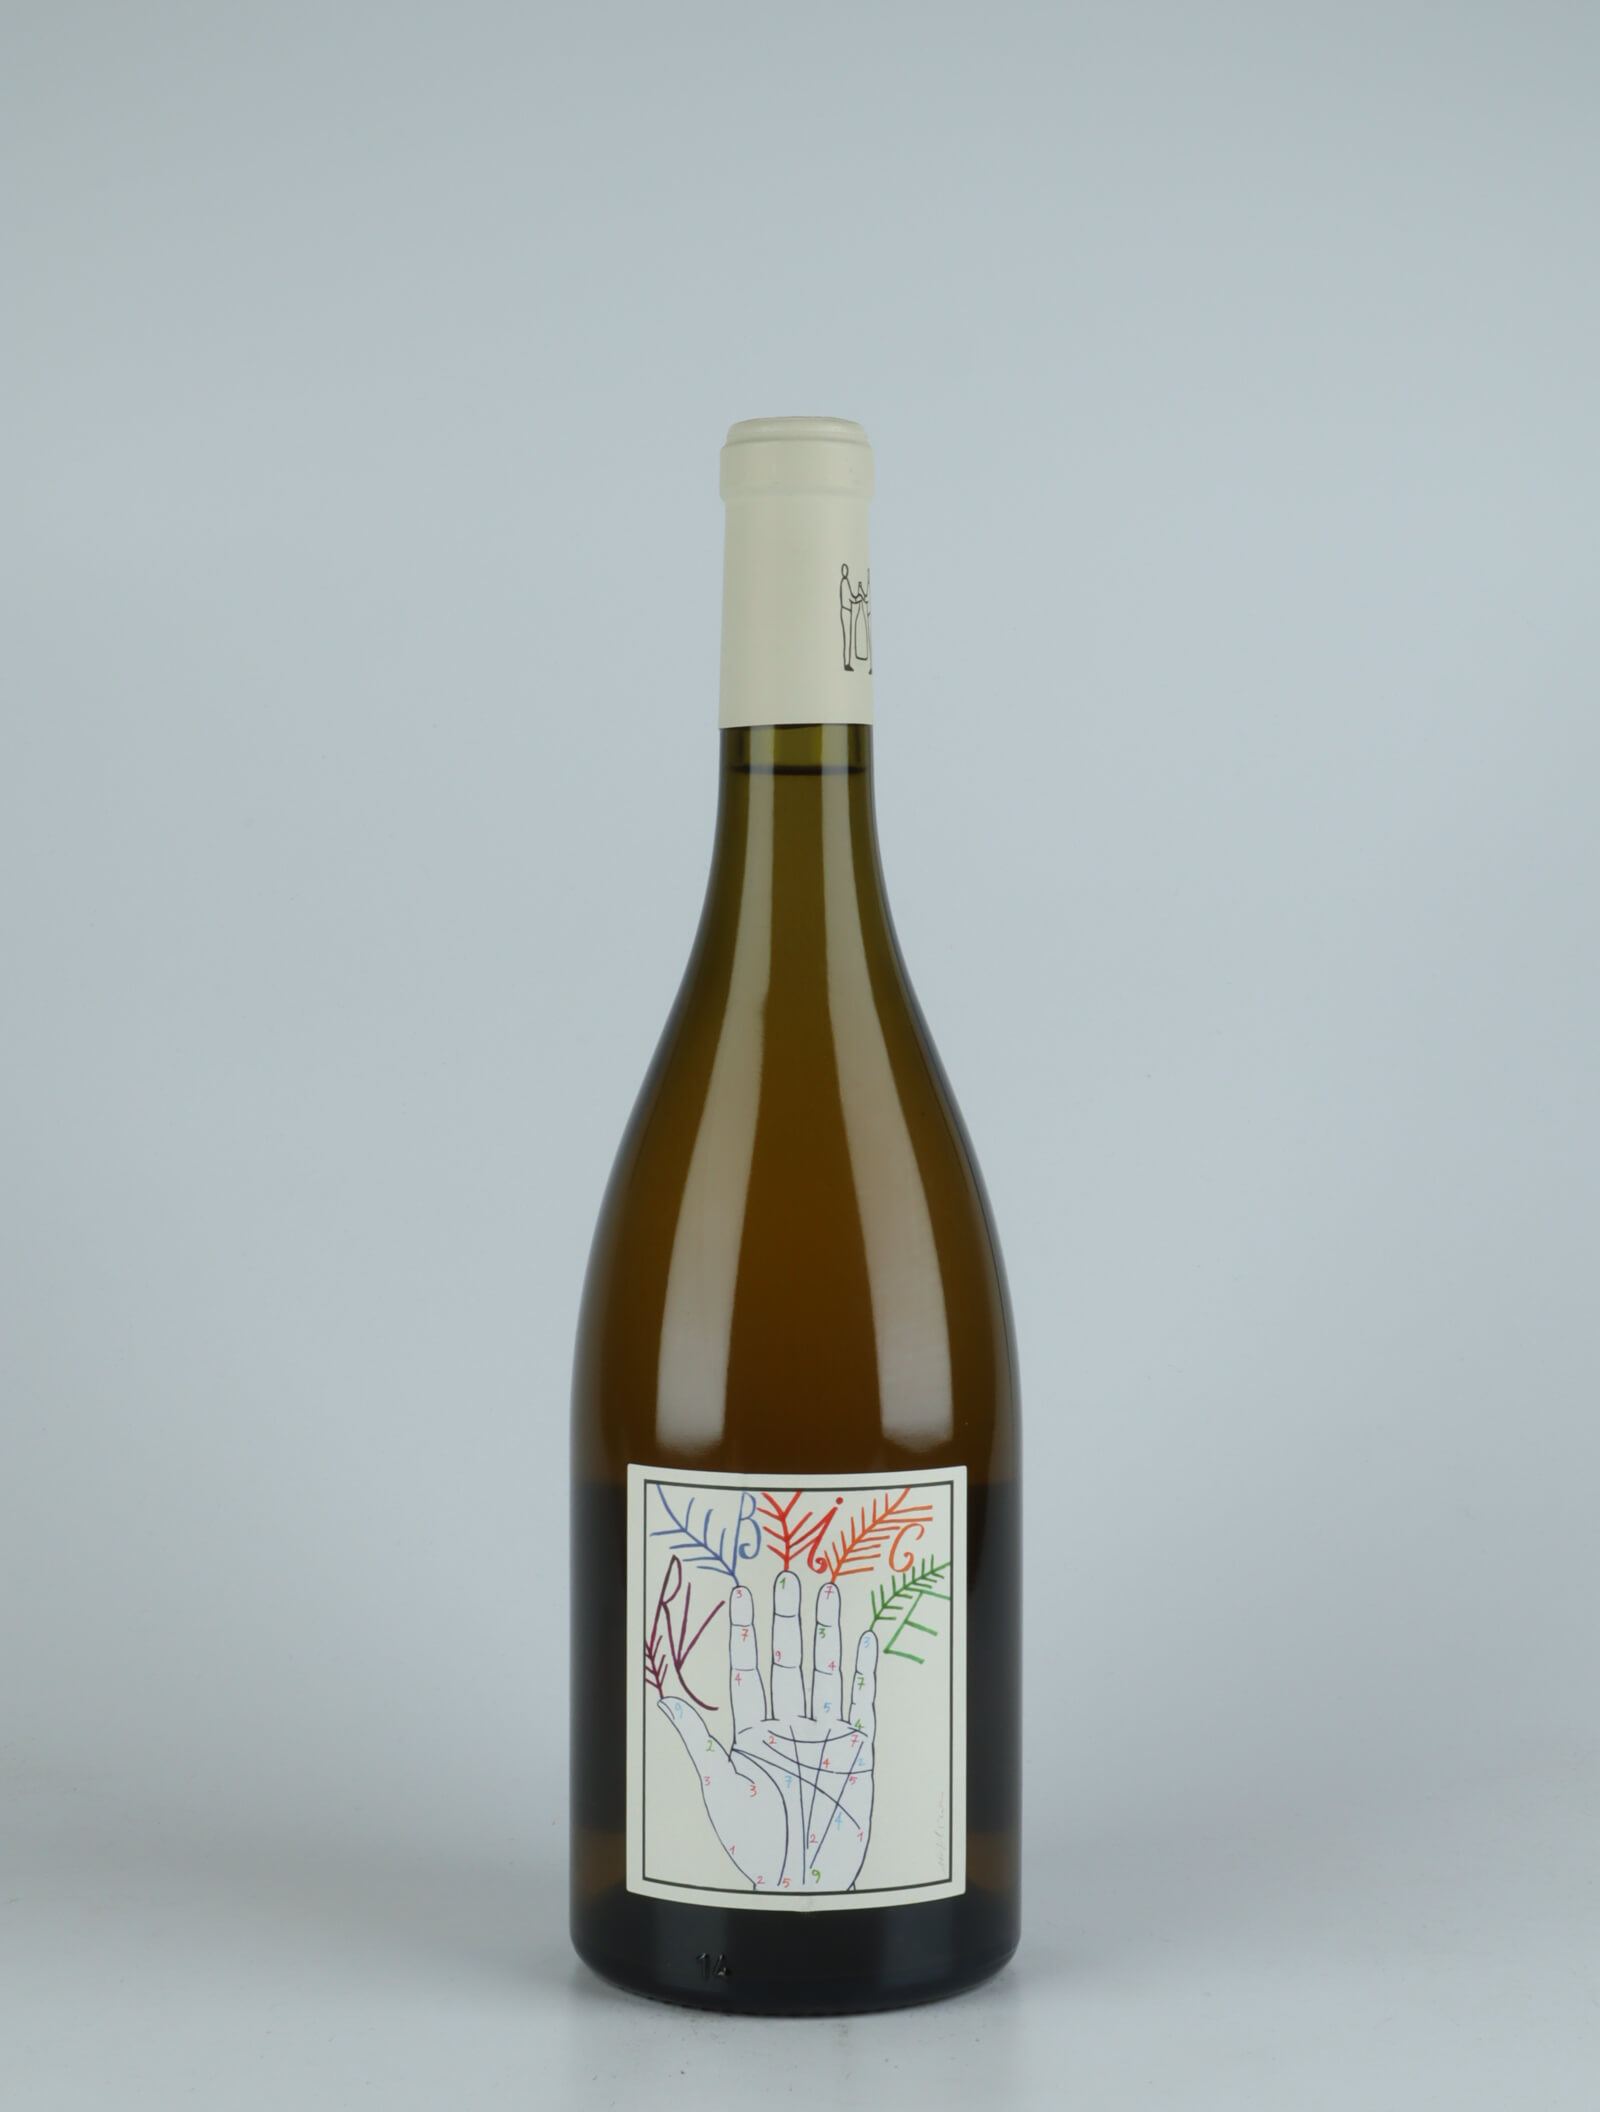 A bottle 2020 Rubice White wine from Marco Tinessa, Campania in Italy